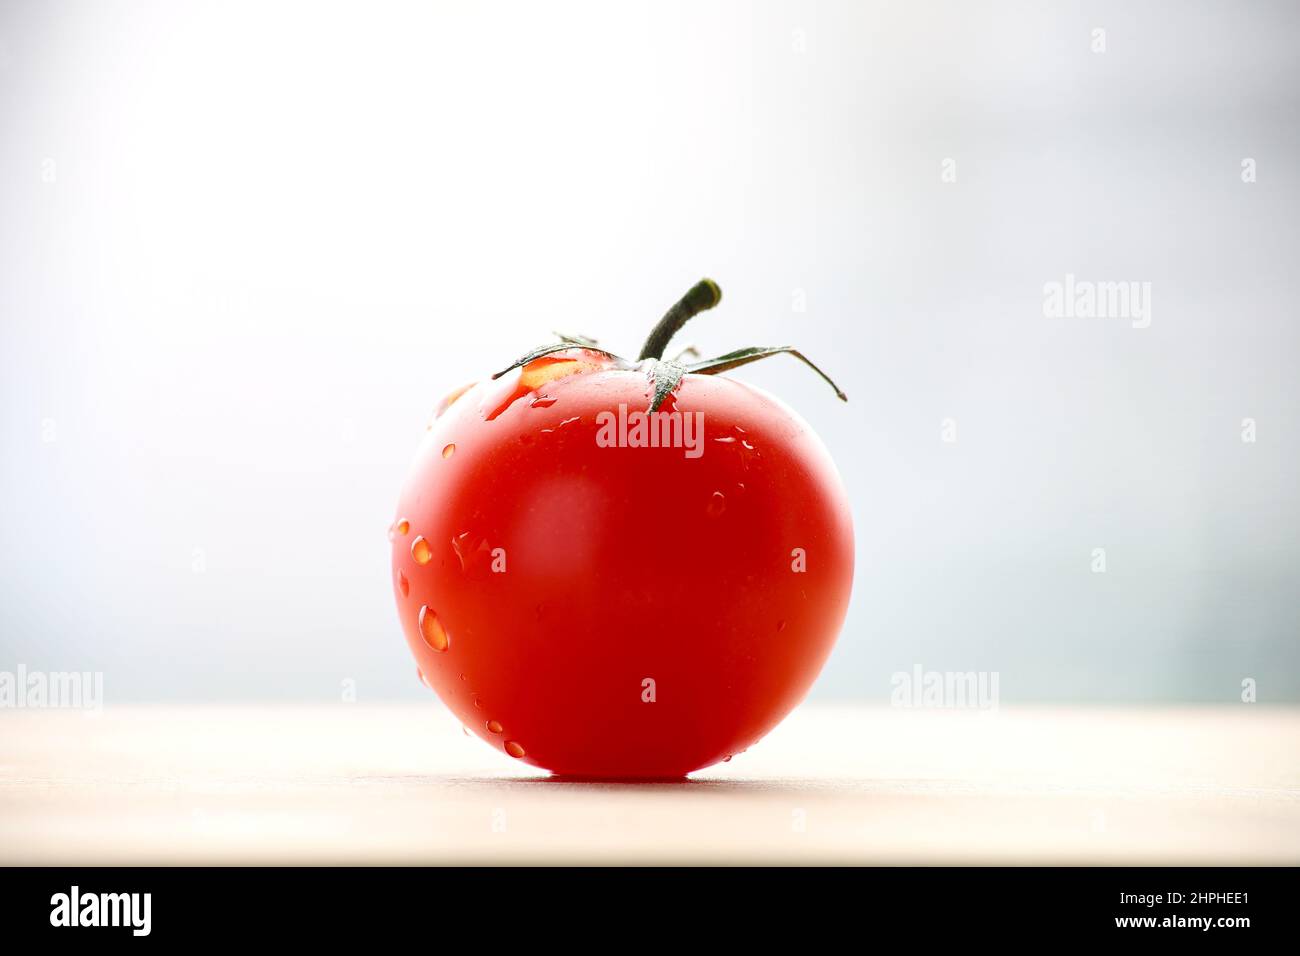 Fresh ripened red tomato on cutting board. Side view with bright bullred background. Stock Photo